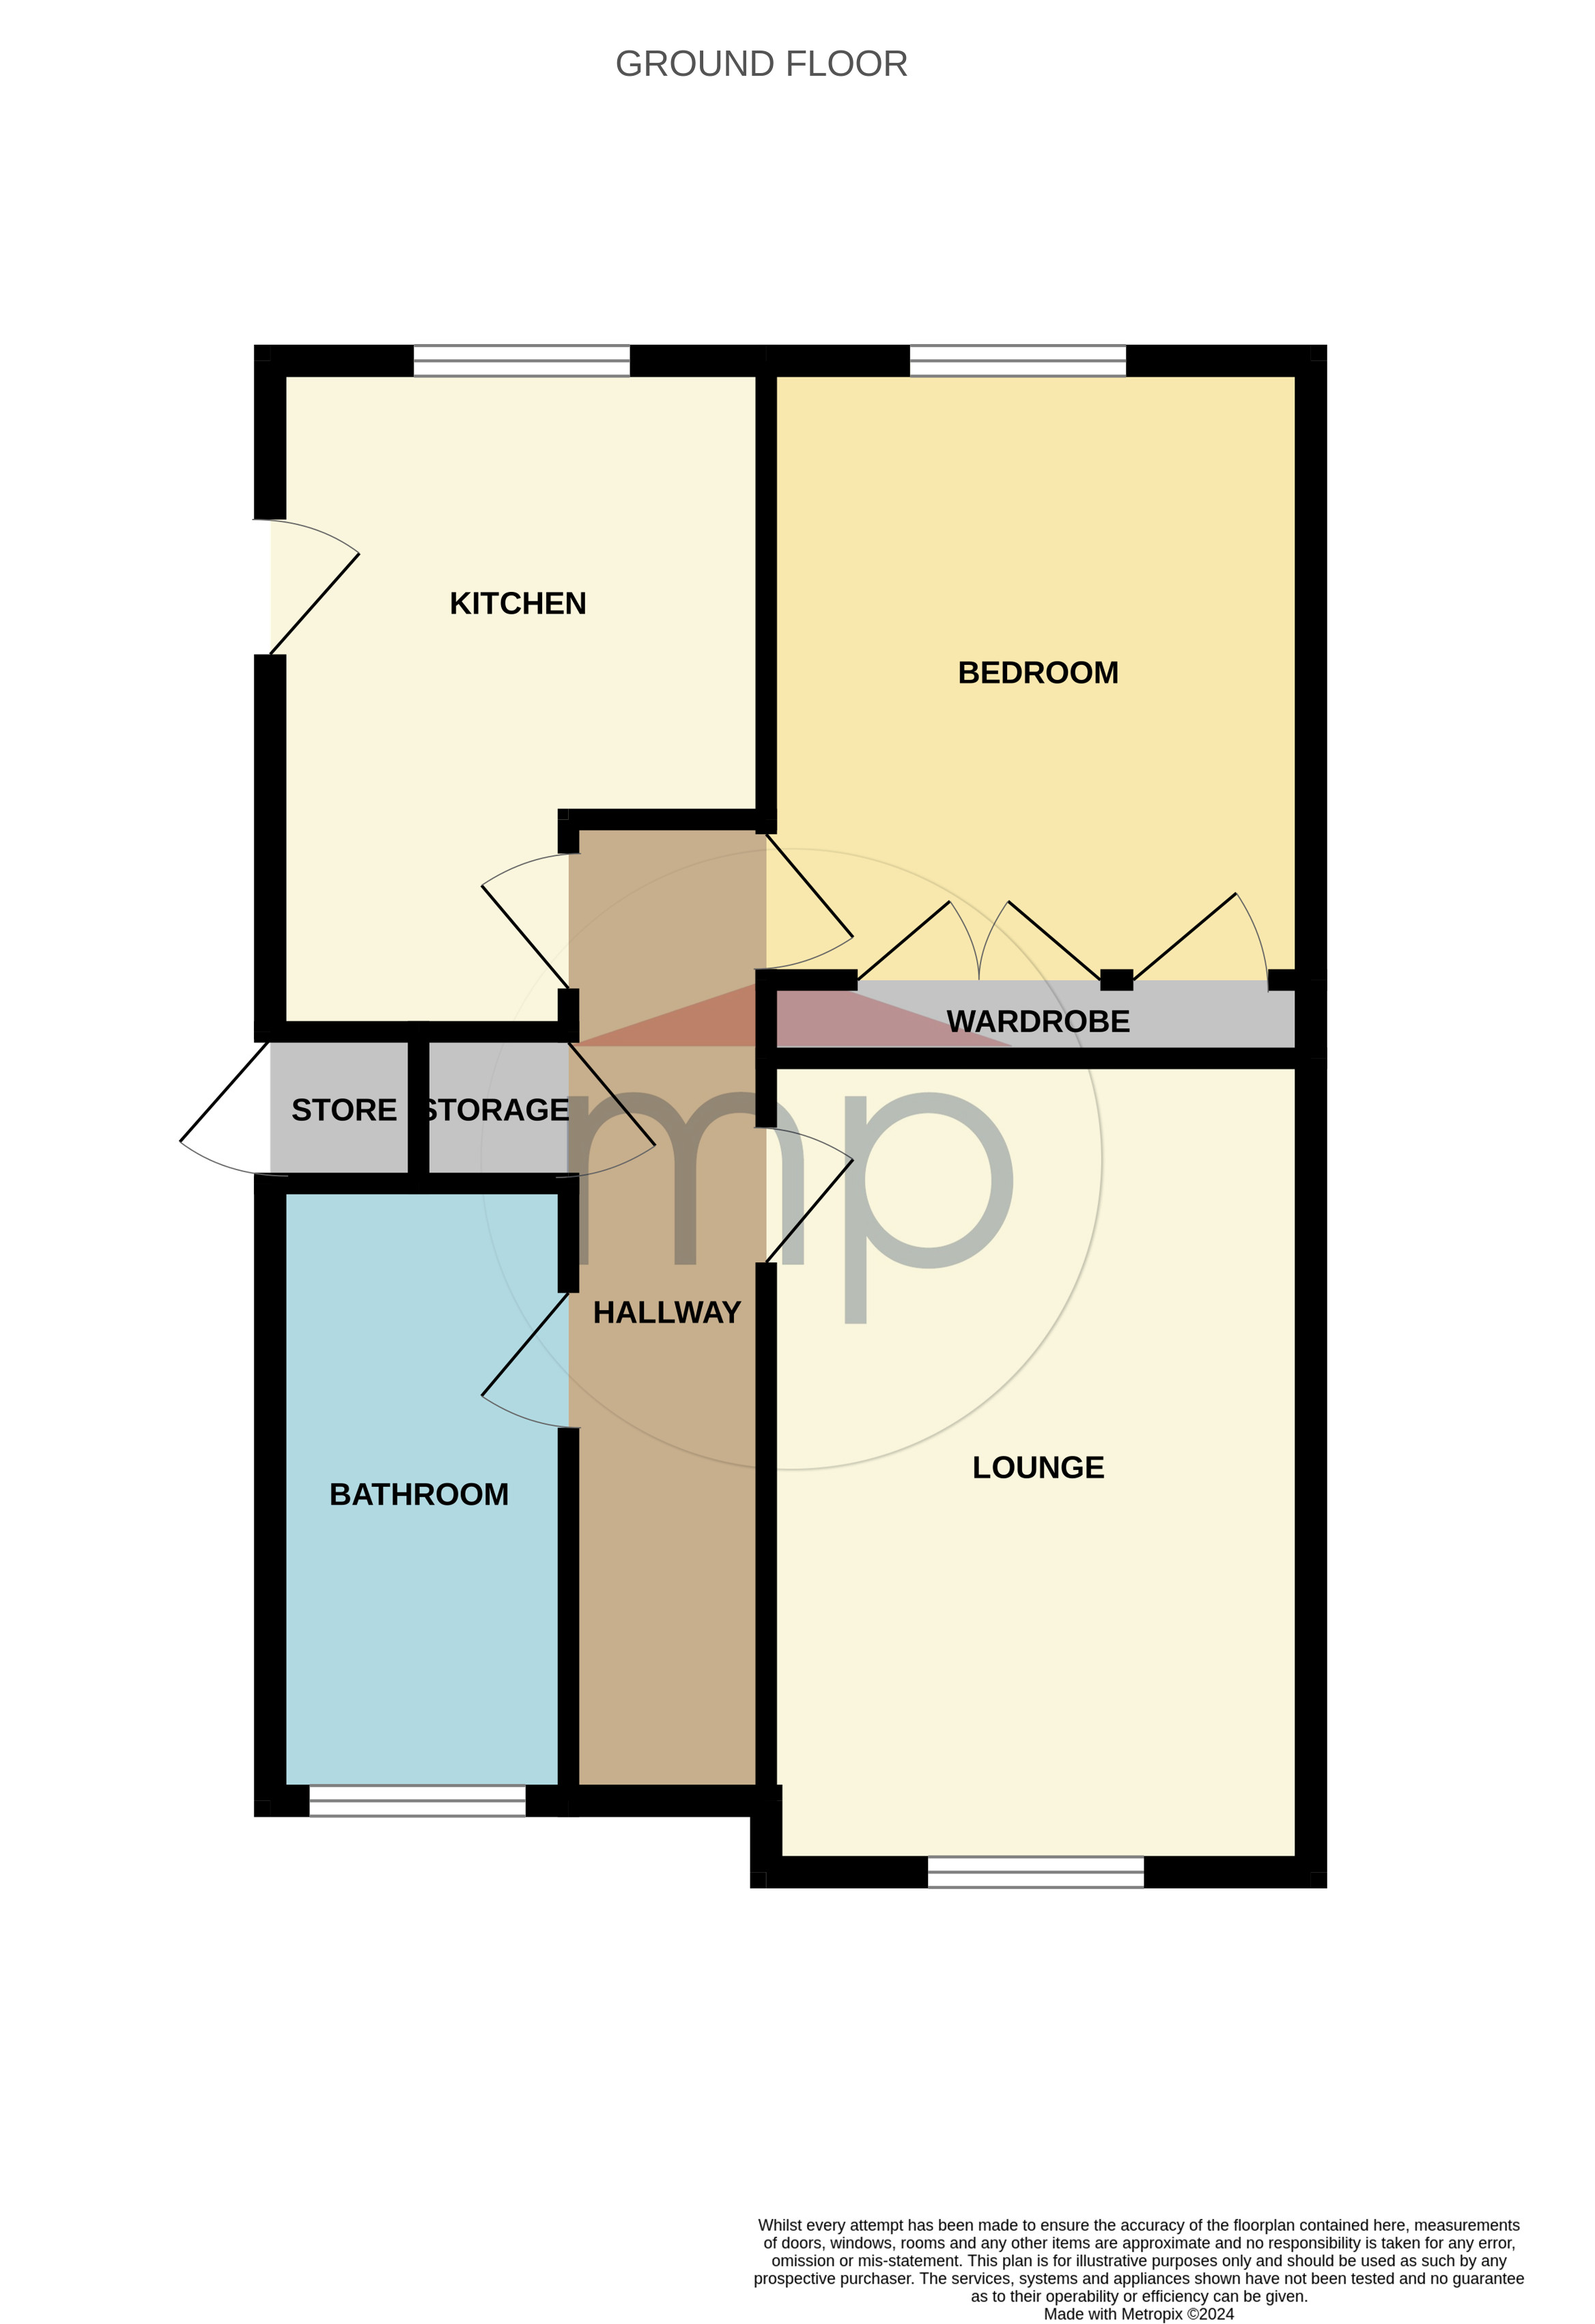 1 bed bungalow for sale - Property floorplan